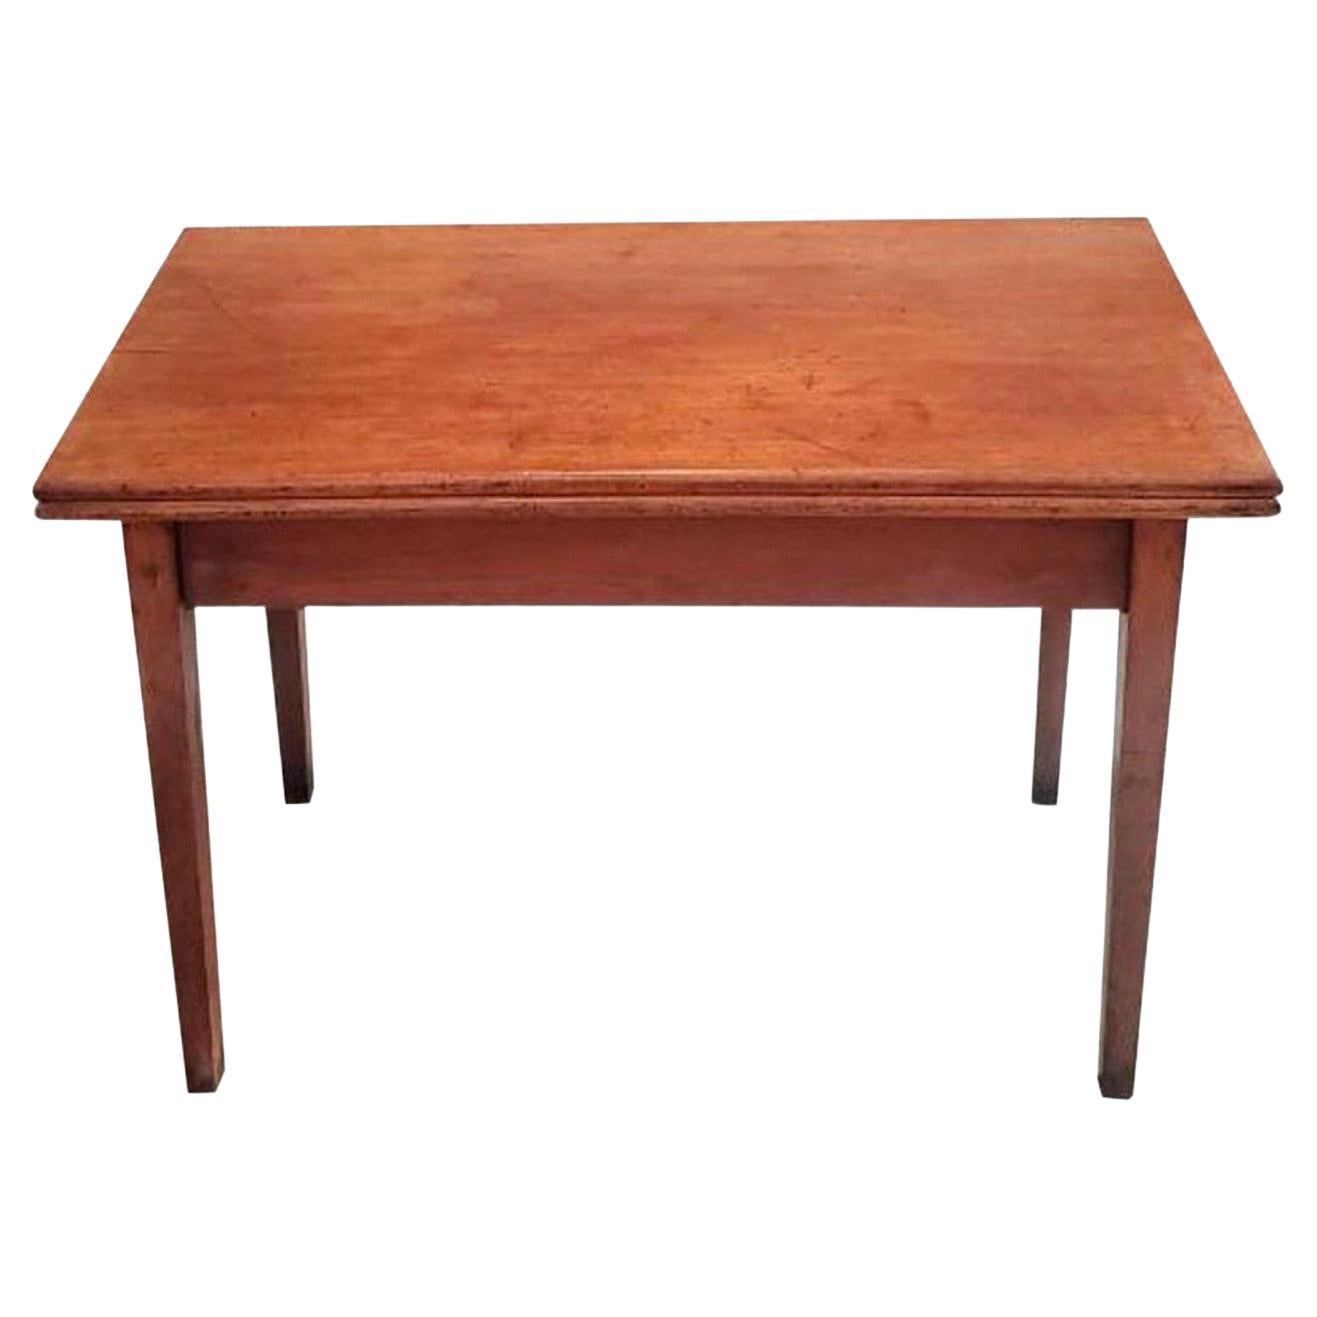 Early 19th Century American Flip-Top Games Table